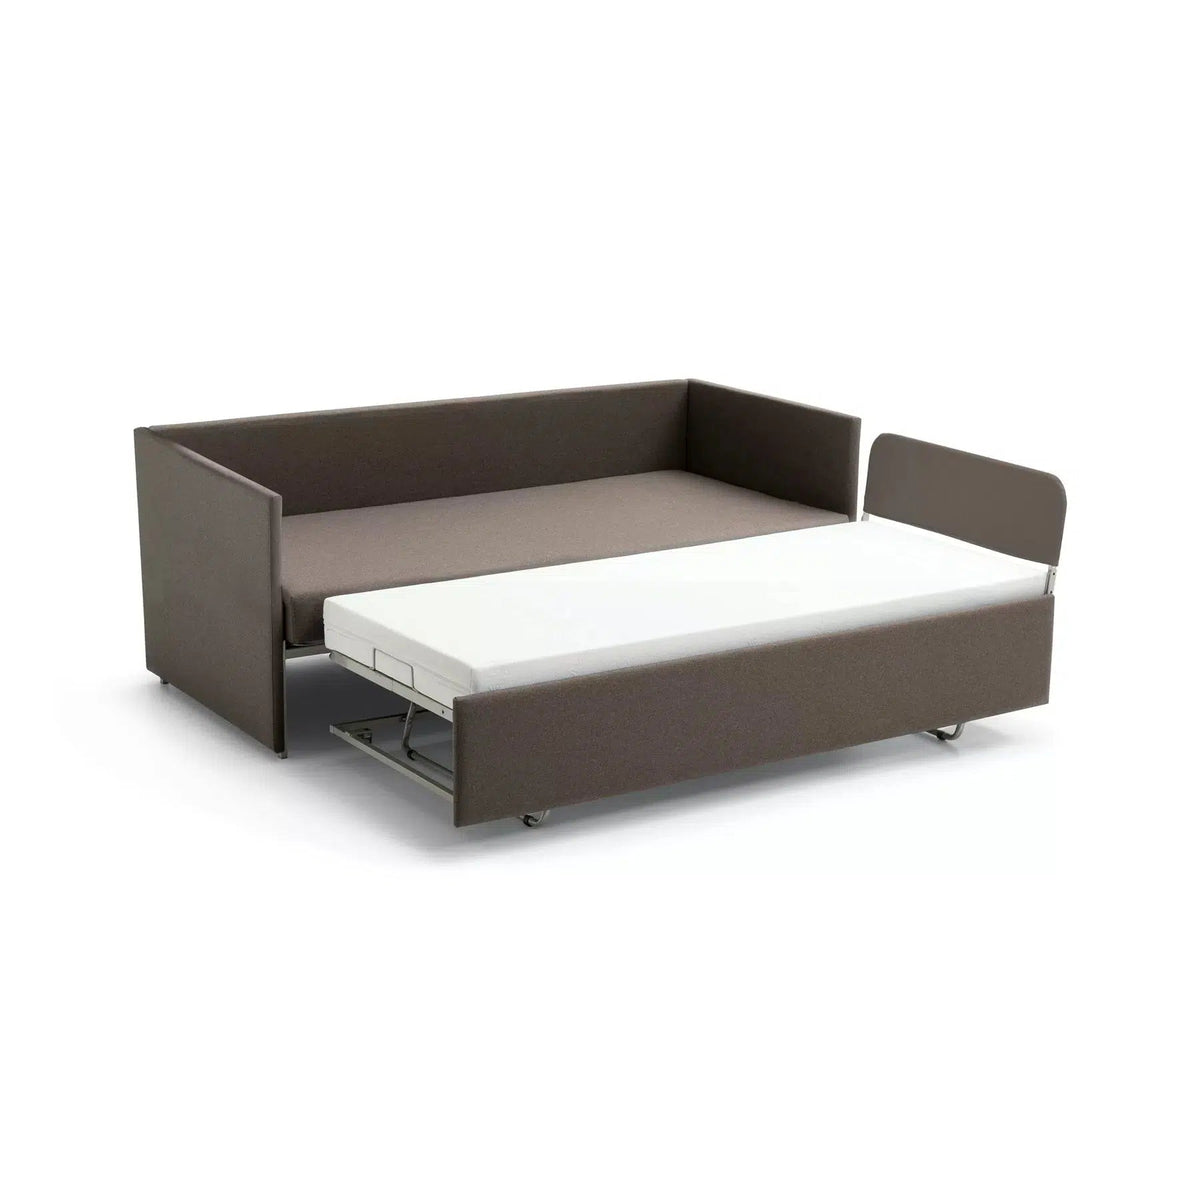 Naxos 960 Sofa Bed-TM Leader-Contract Furniture Store